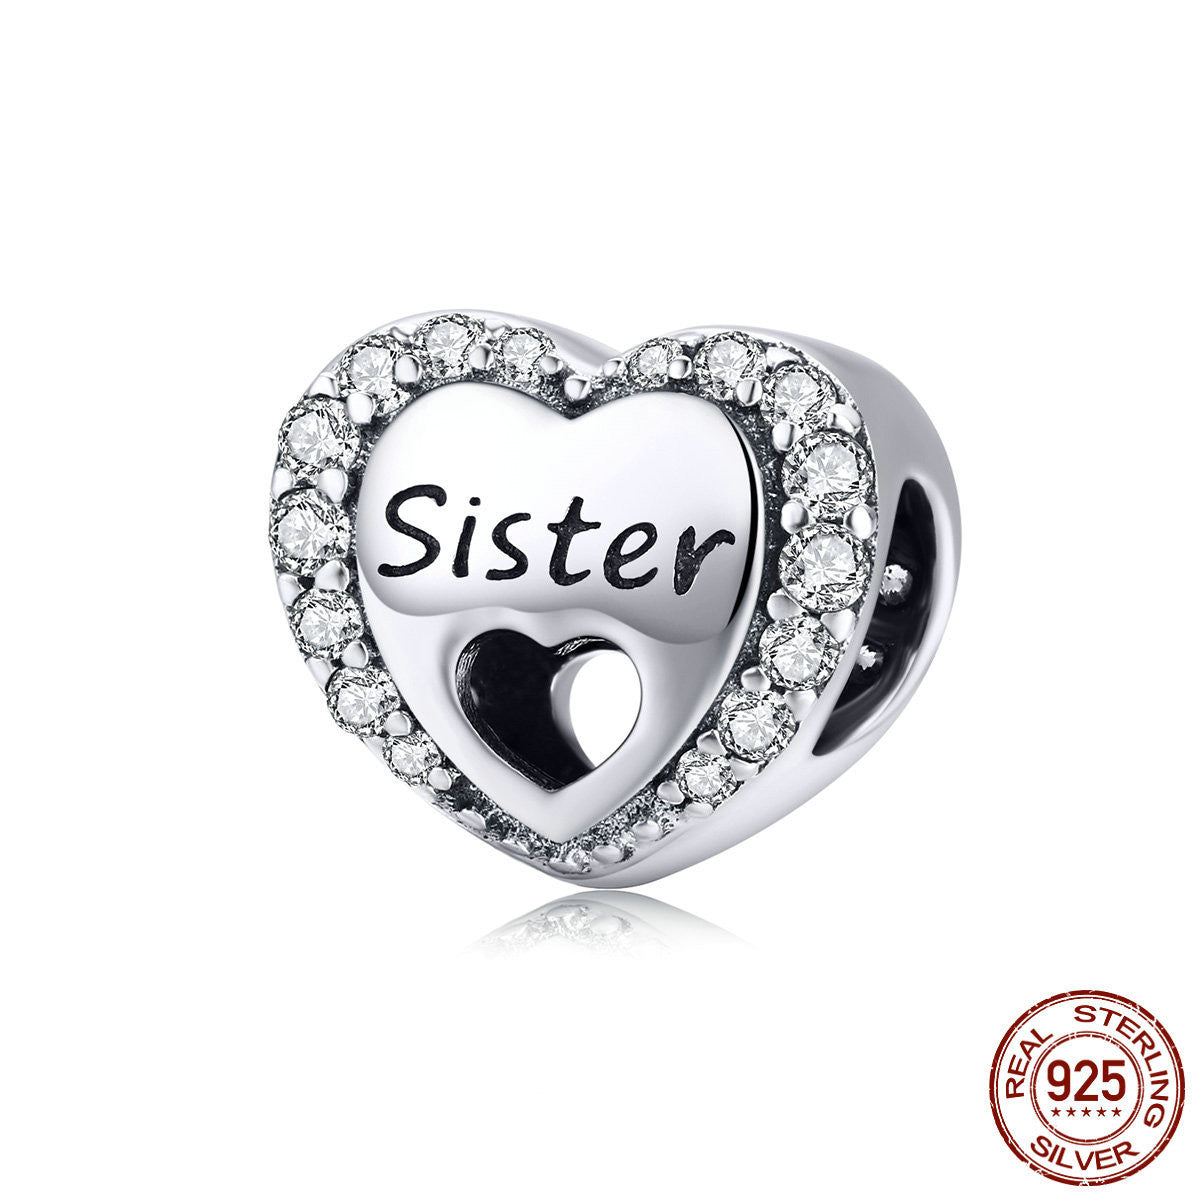 Sister Sterling Silver Charm